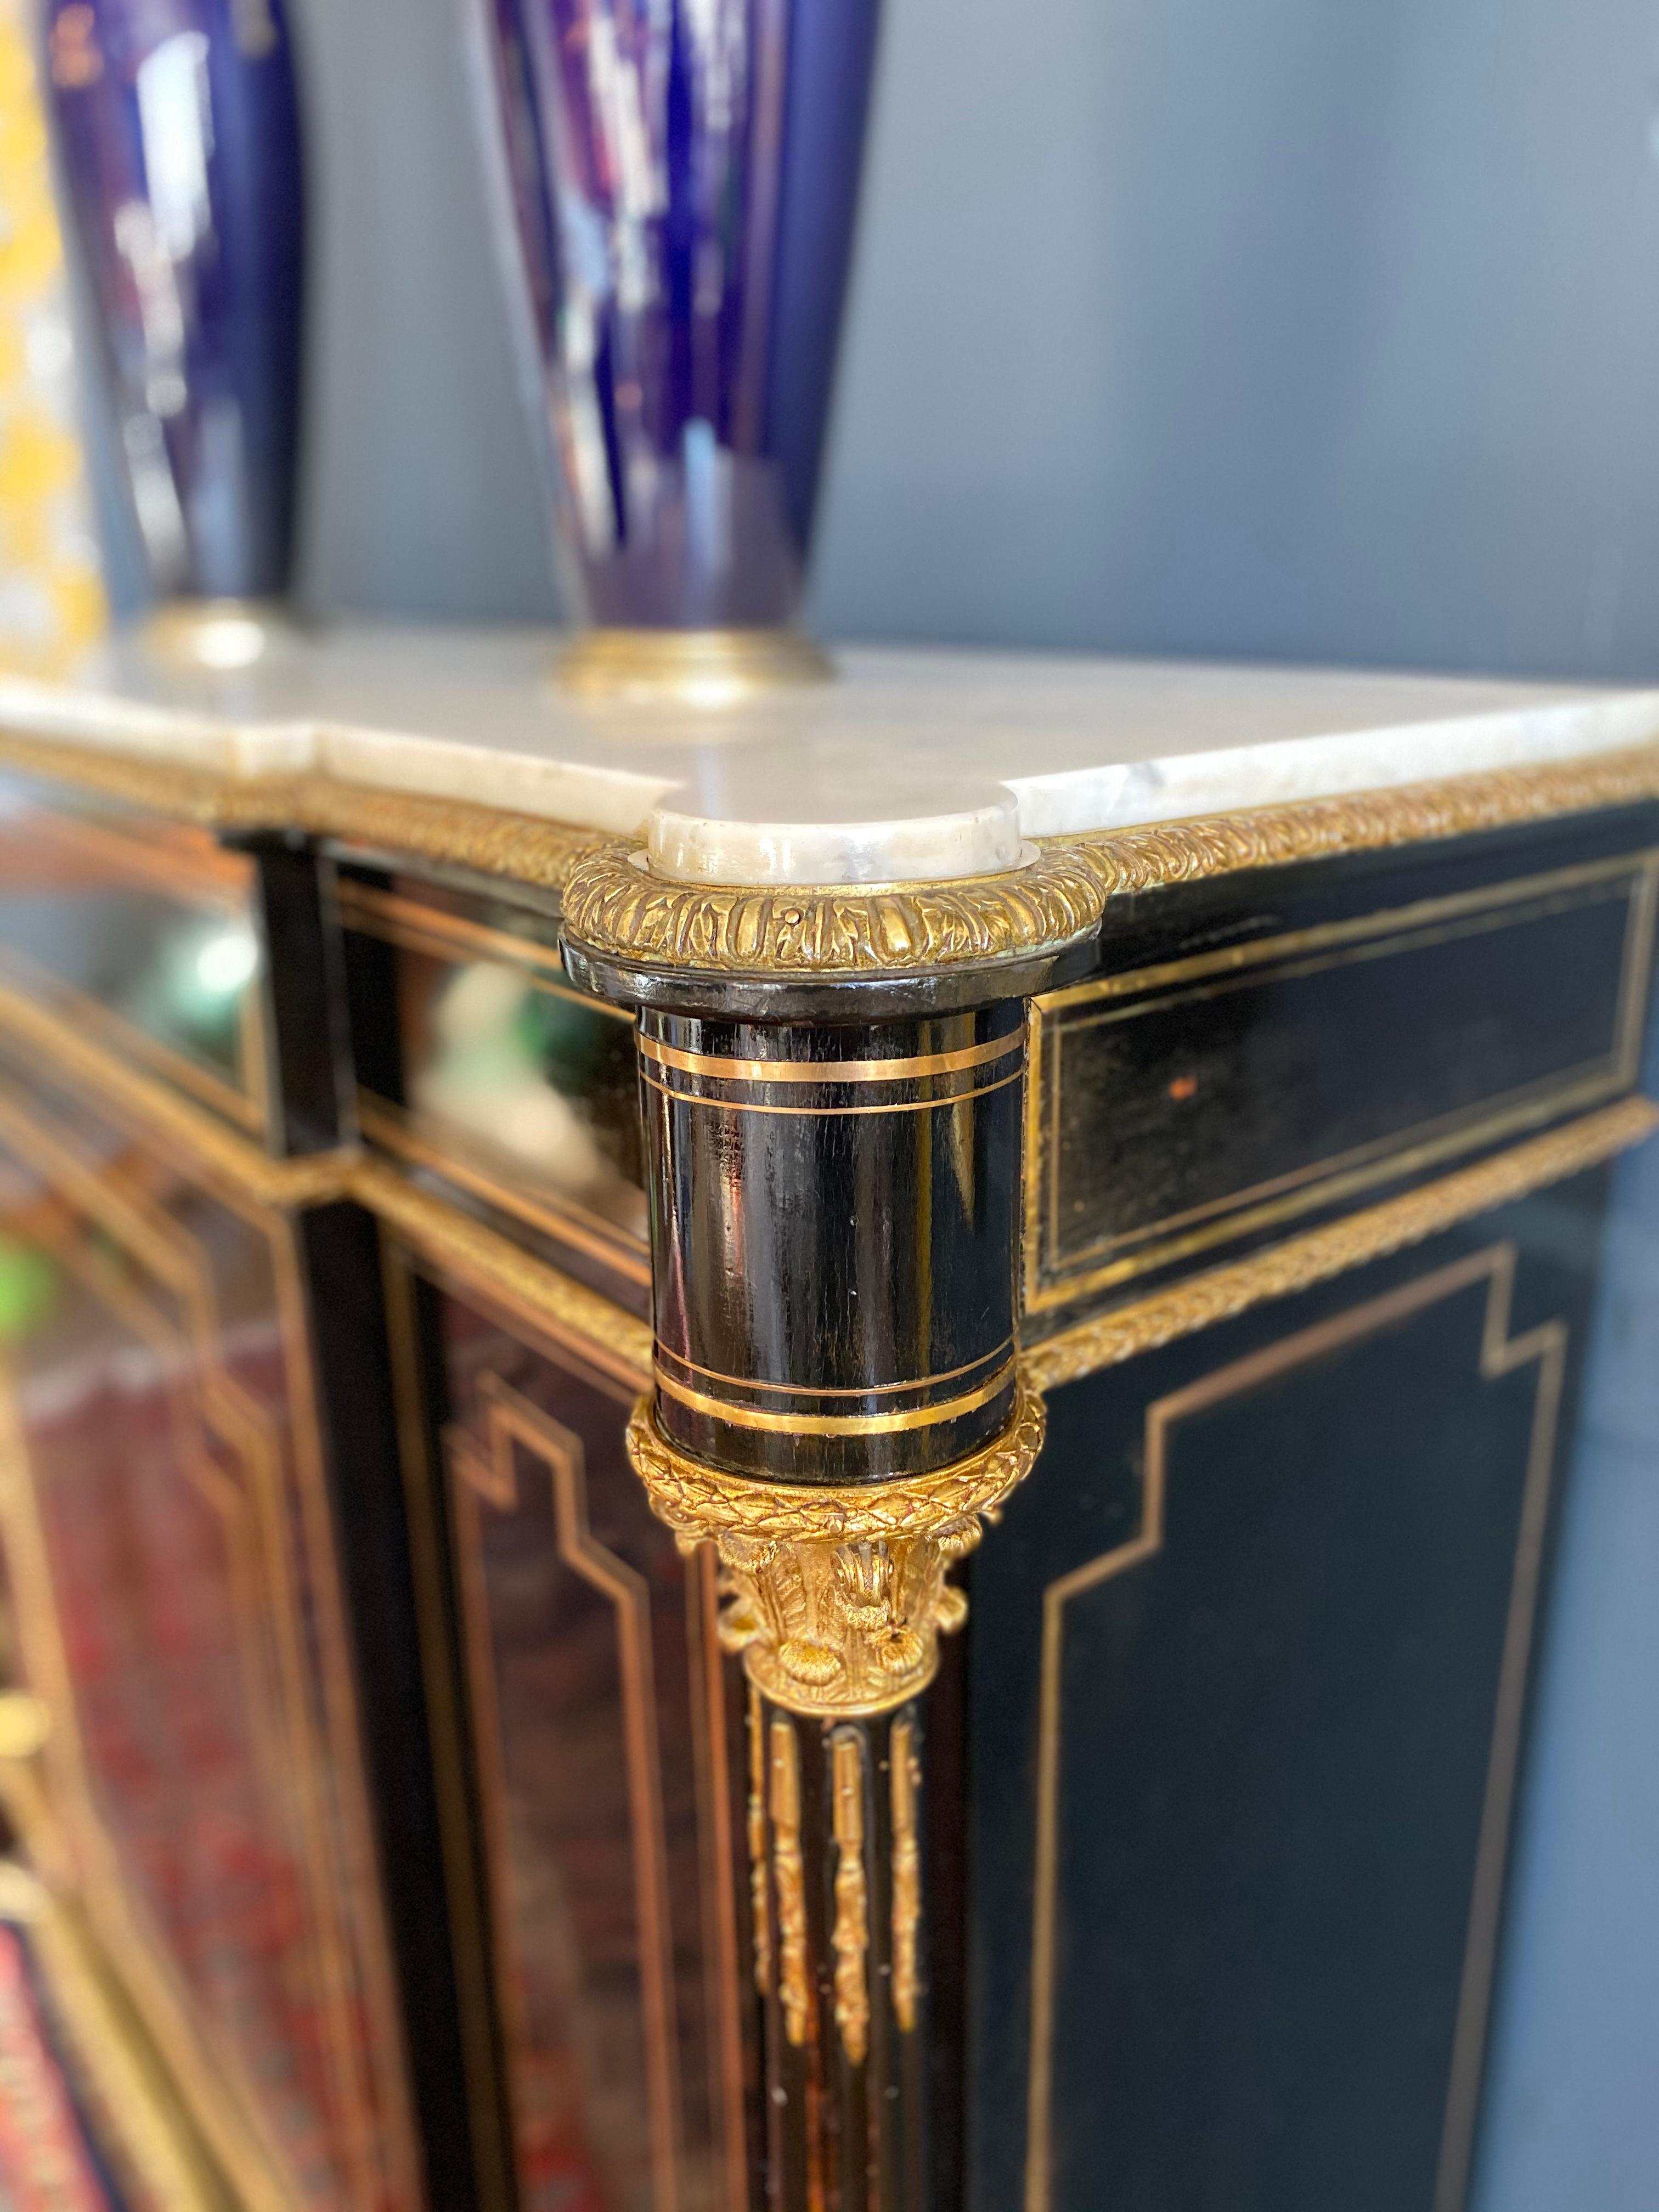 Late 19th Century French Napoleon III Credenza Gilt Bronze Mounted Ebonized Cabinet Sideboard For Sale